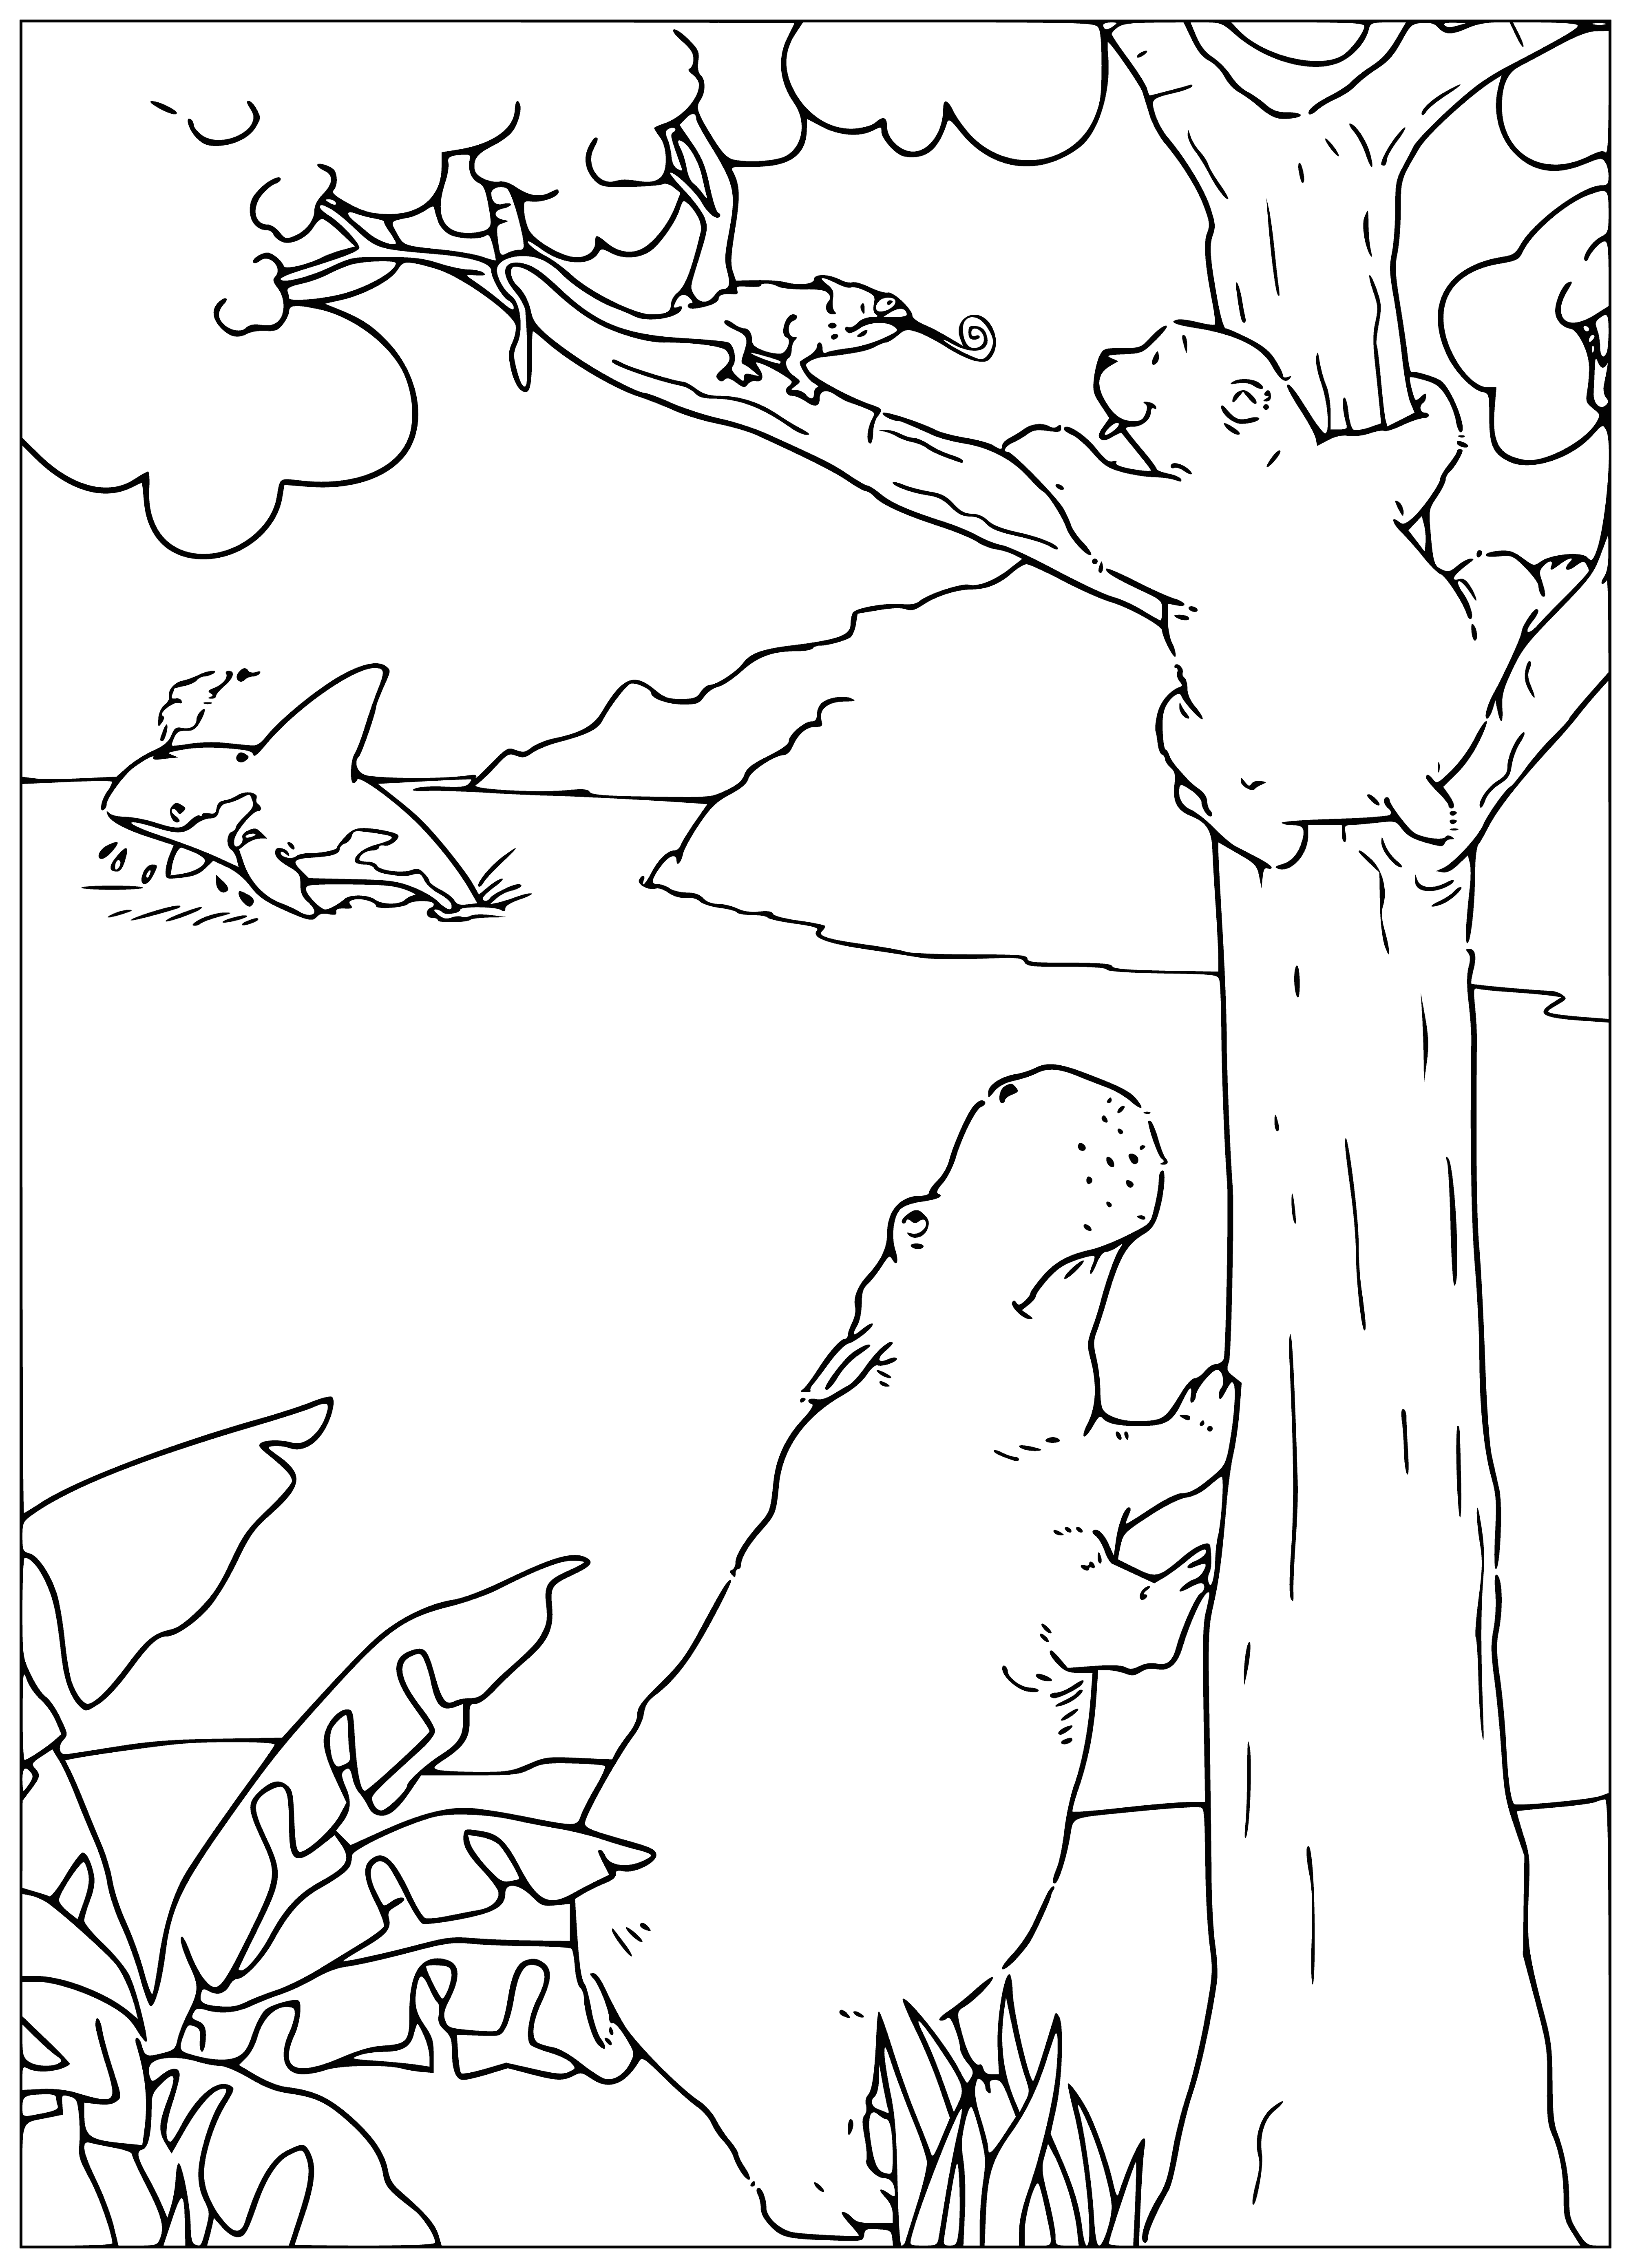 coloring page: Lars spreads his arms and legs out, smiling happily atop a tree.